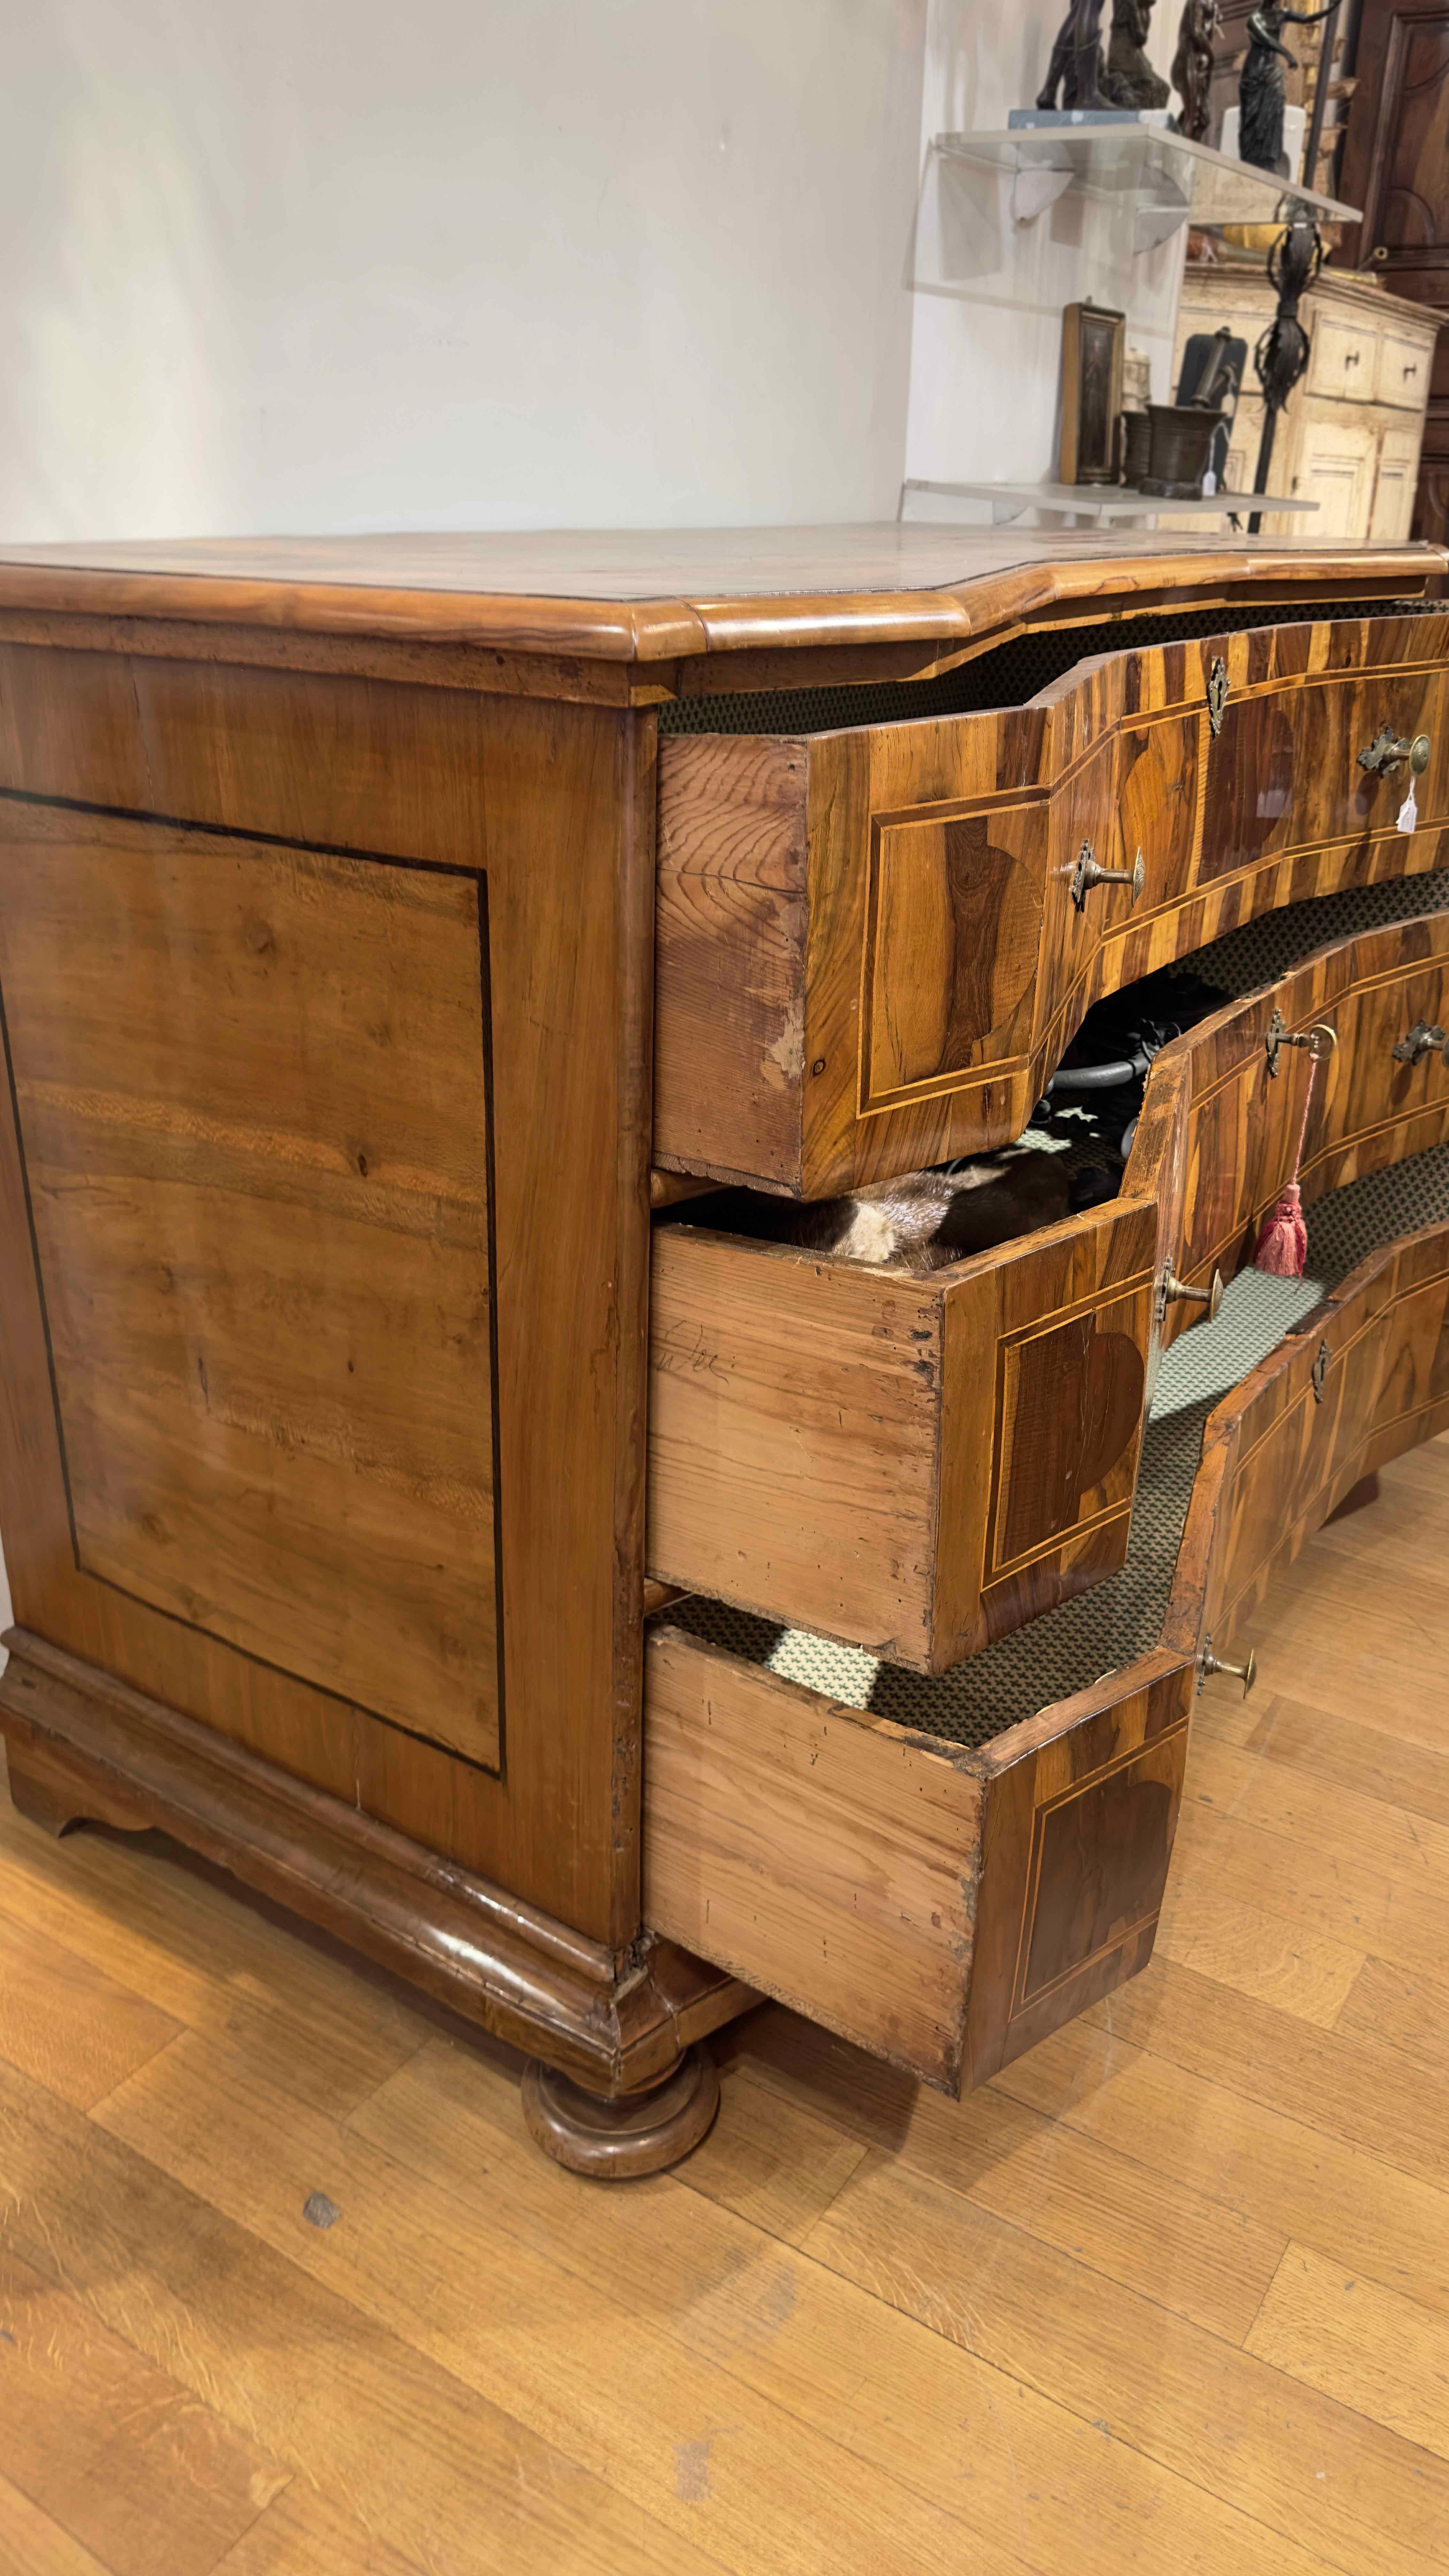 18th CENTURY VENETIAN VENEREED AND INLAID CHEST For Sale 1